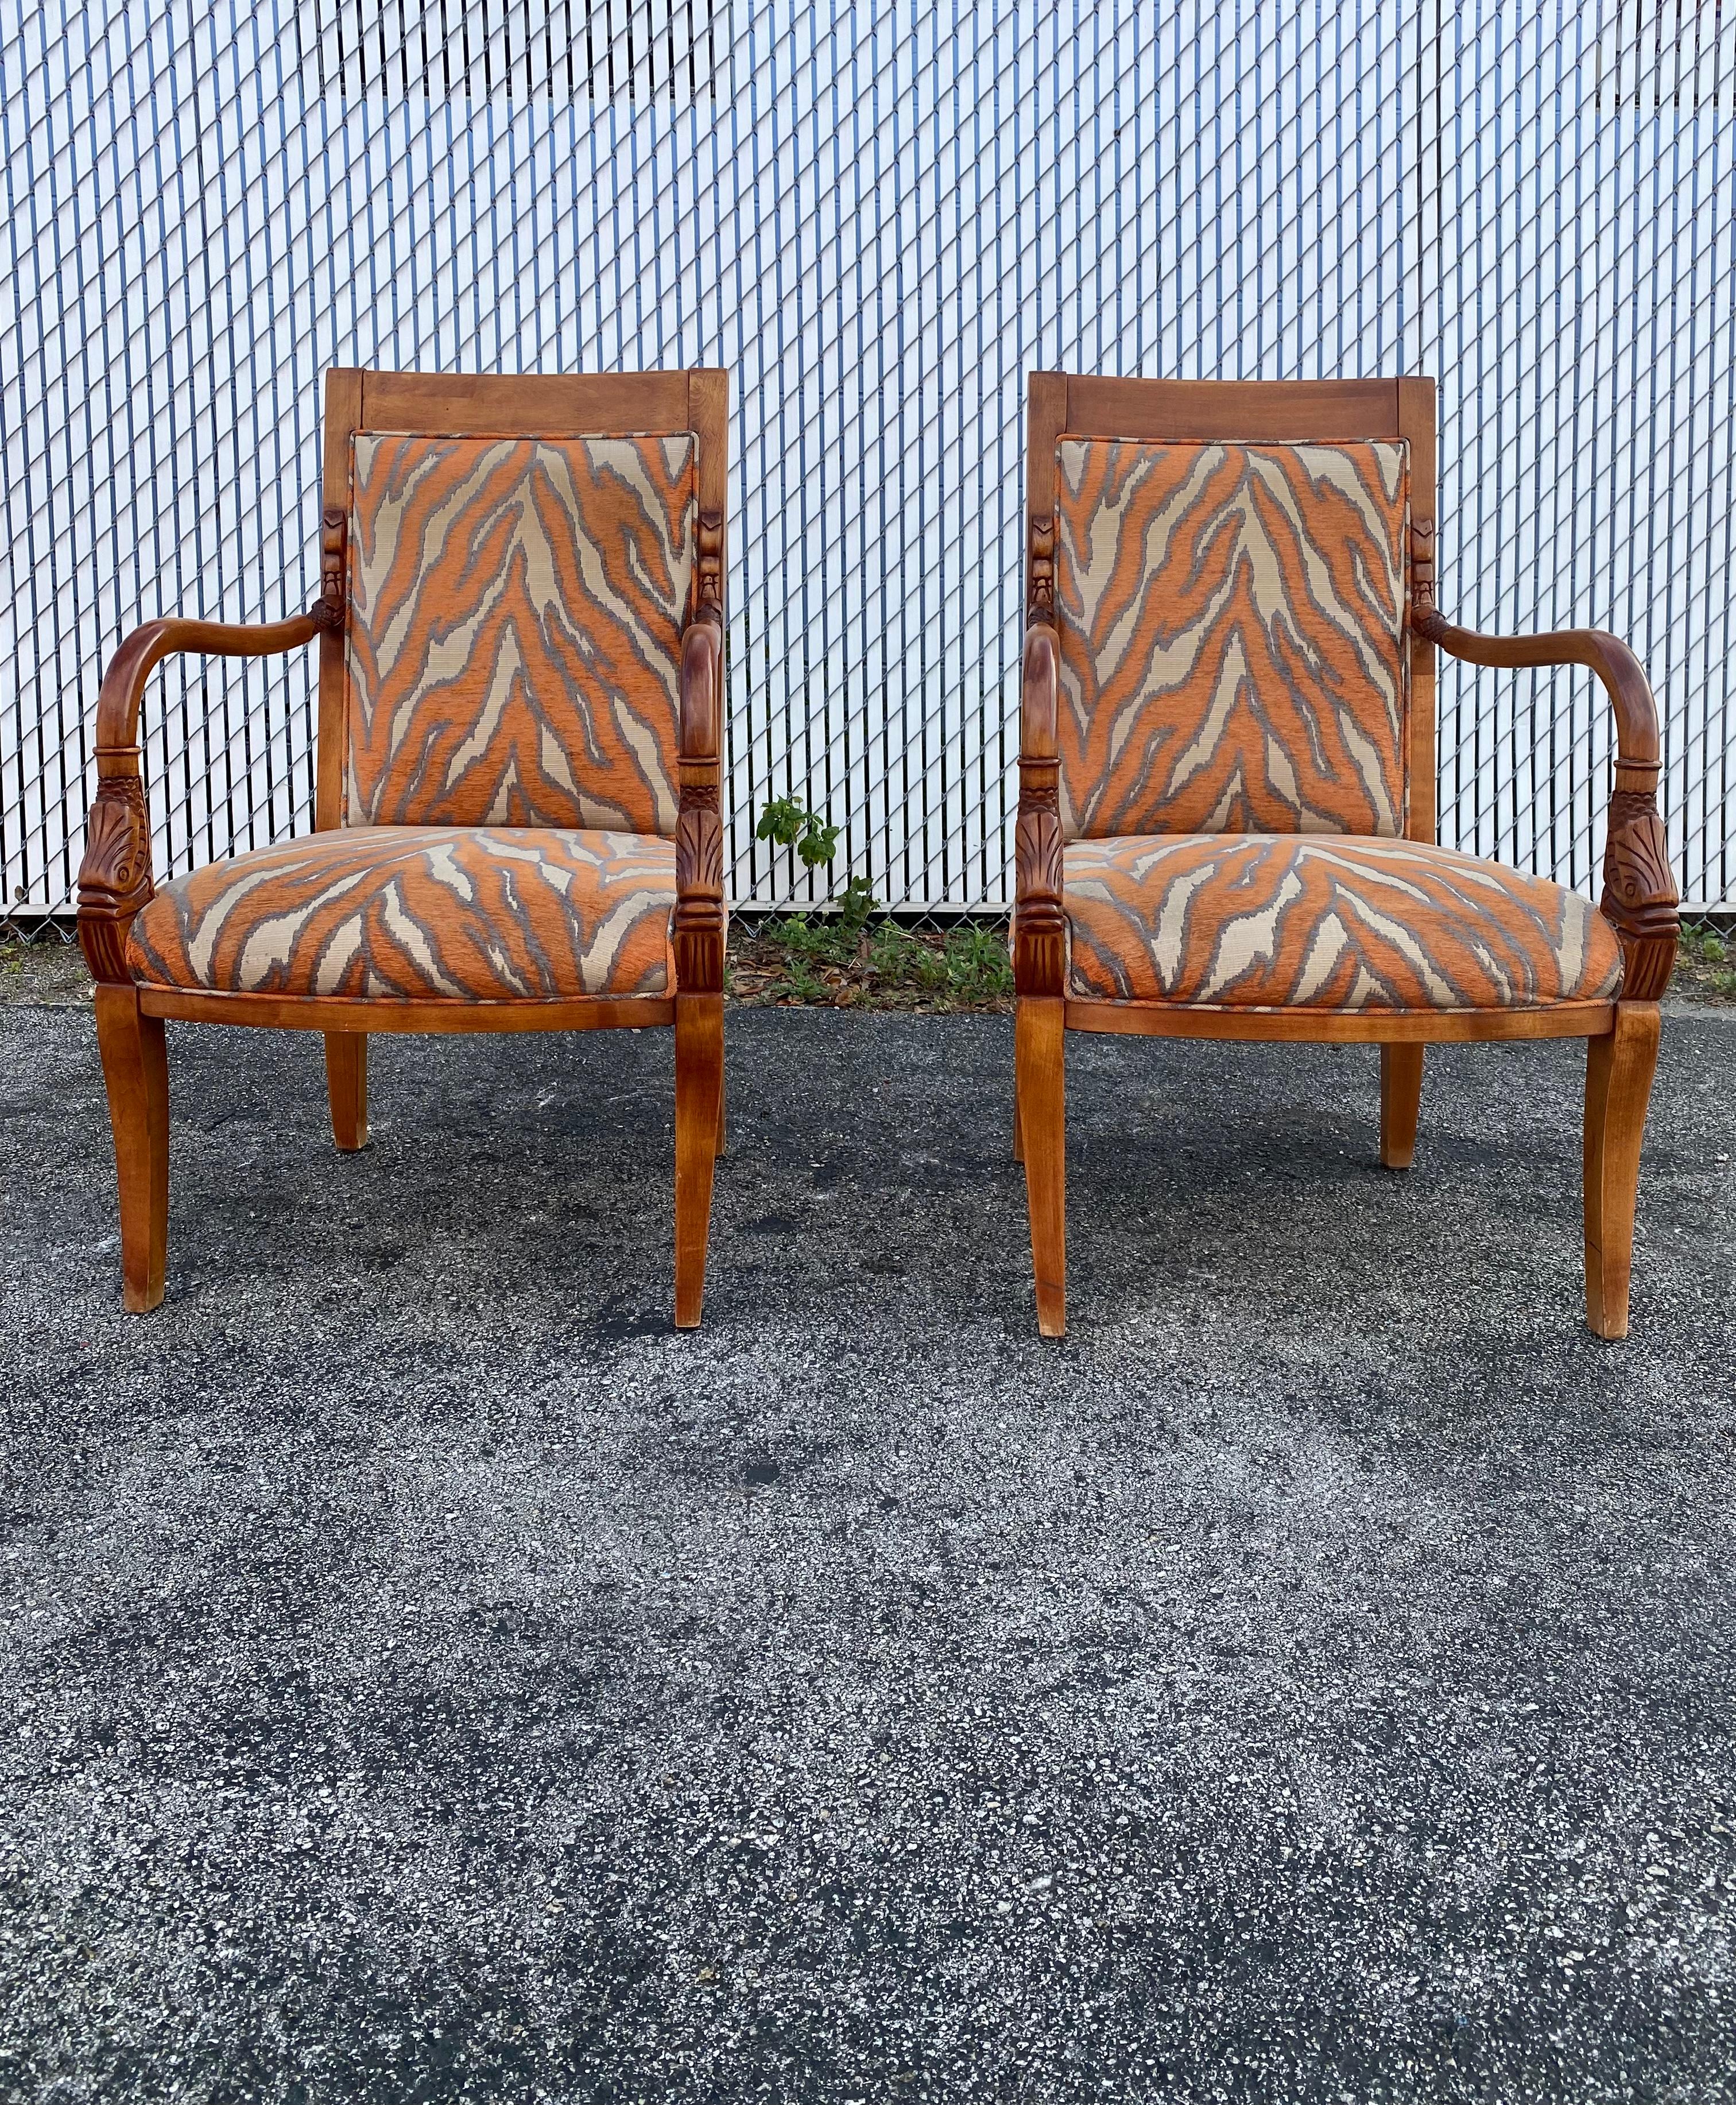 The vintage chairs and ottoman set is packed with personality! Outstanding design is exhibited throughout. Stylish hand carved goldfish with sculptural bentwood frames and rich wood tone is complementary to the zebra style upholstery. The richness